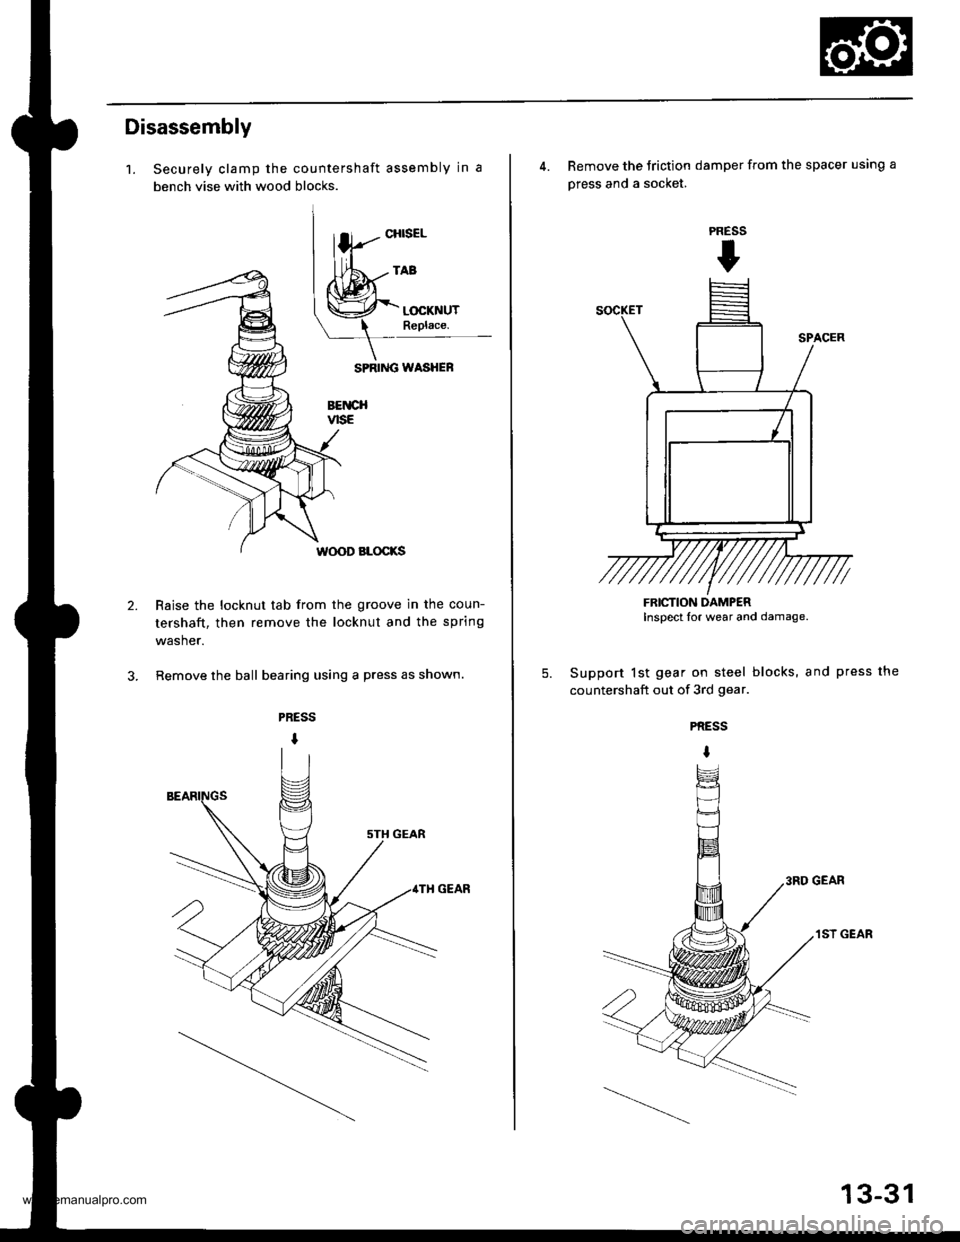 HONDA CR-V 2000 RD1-RD3 / 1.G User Guide 
Disassembly
1.
2.
Securely clamp the countershaft assembly in a
bench vise with wood blocks.
SPRIiIG WASHEF
BETICHvtsE
W(X)D BLOCKS
Raise the locknut tab from the groove in the coun-
tershaft, then r